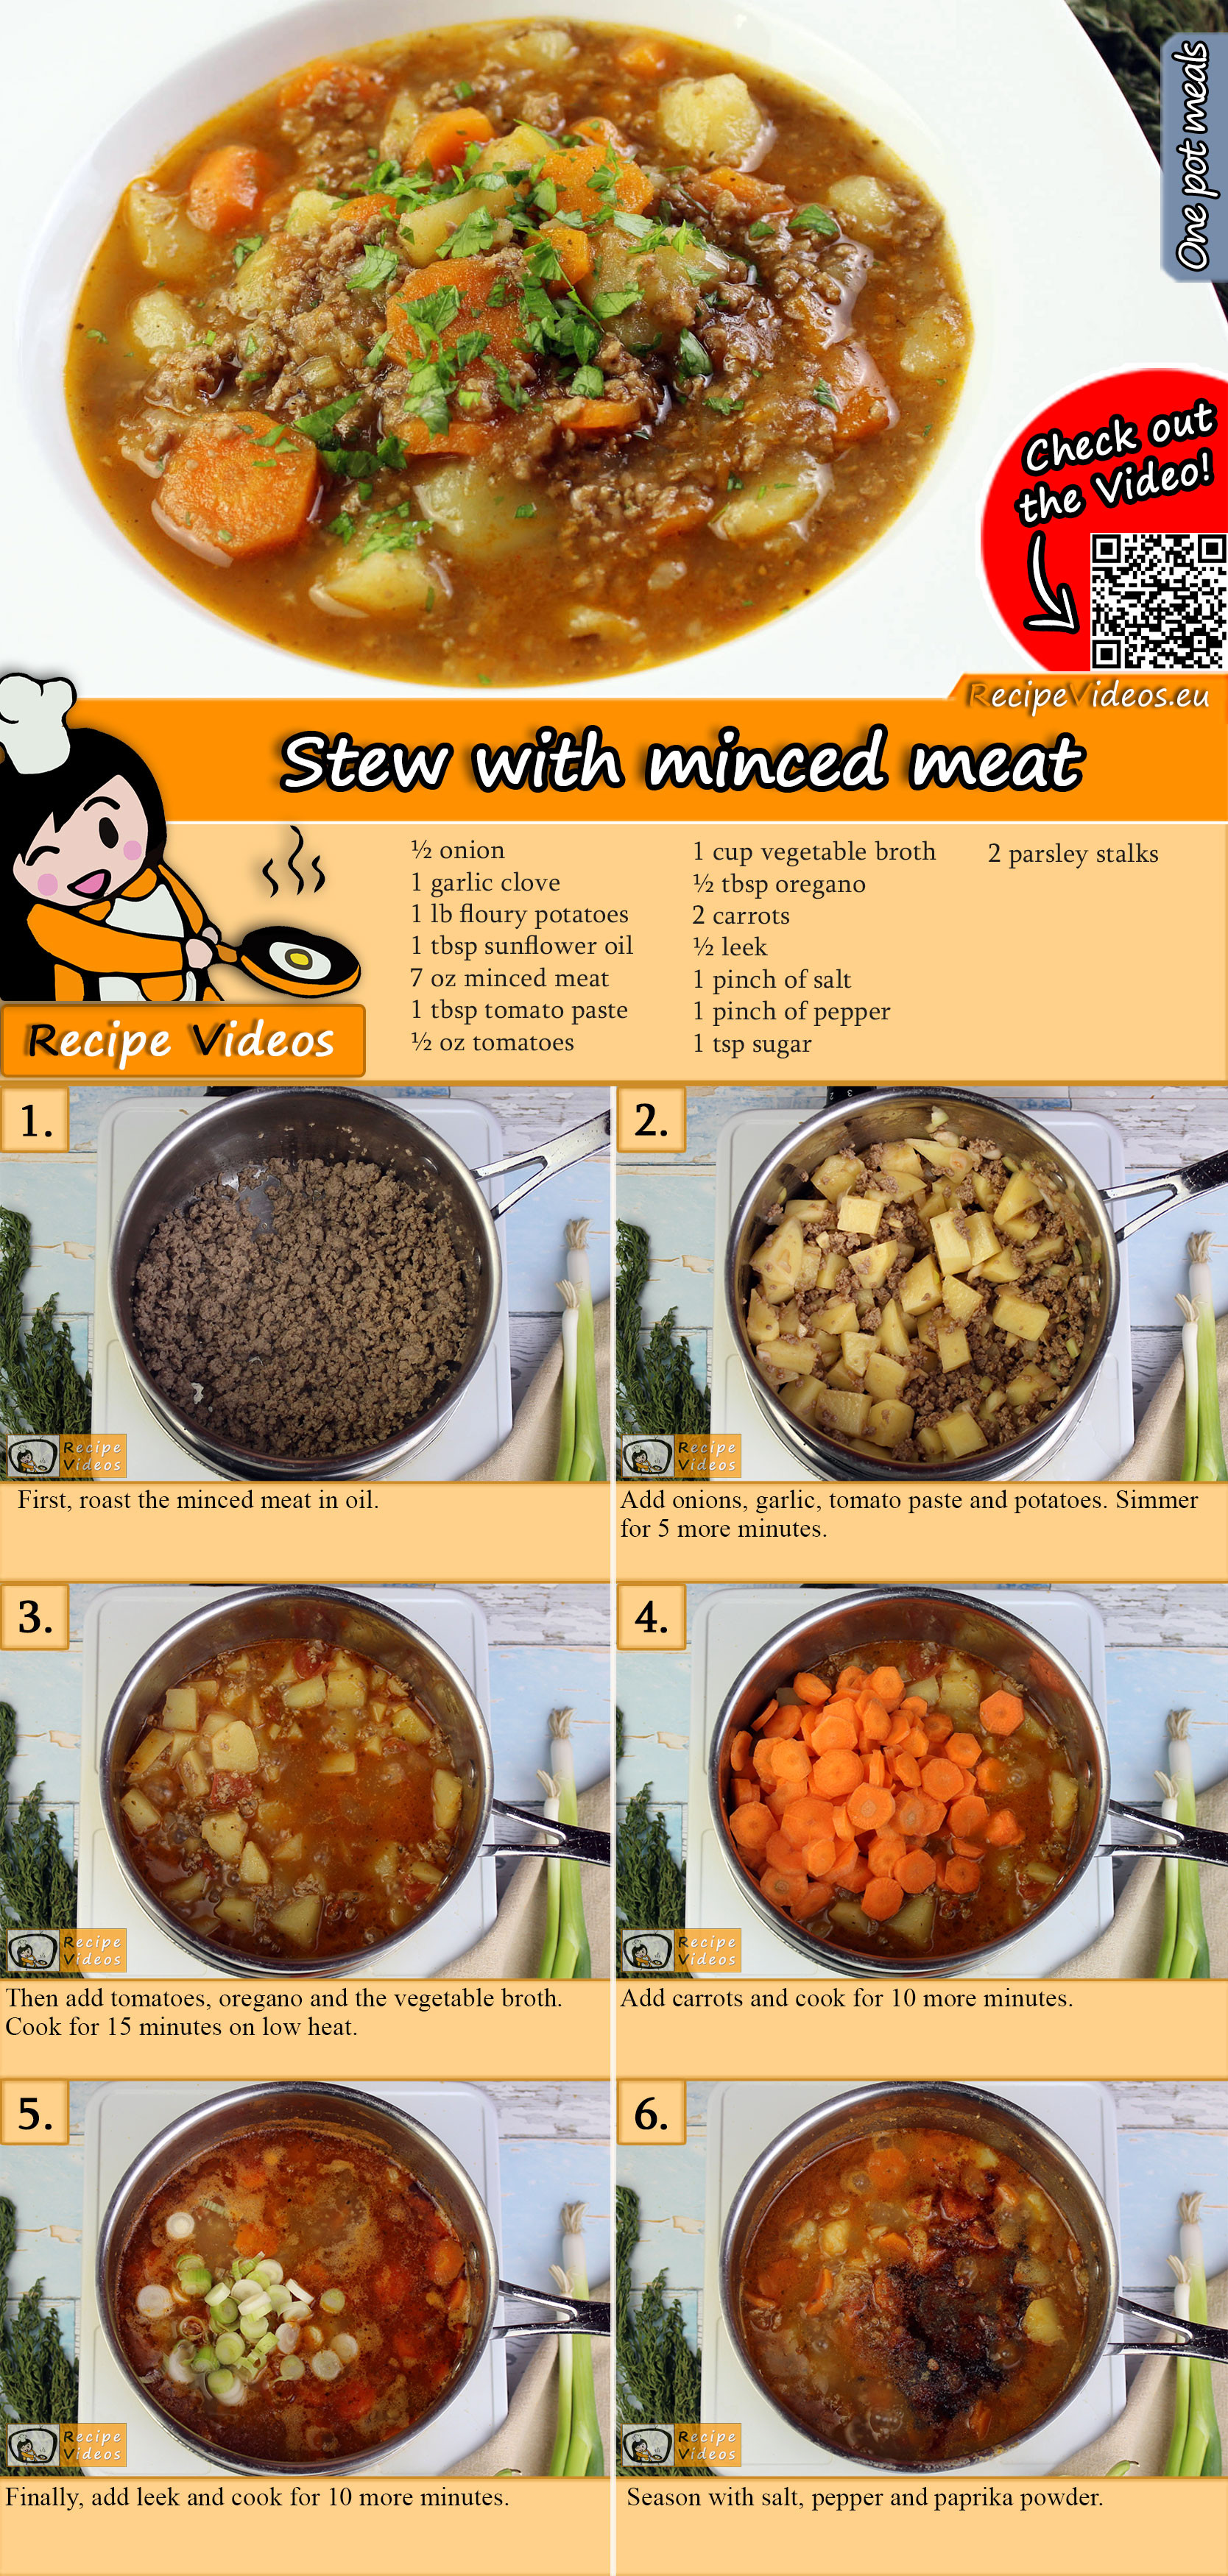 Stew with minced meat recipe with video